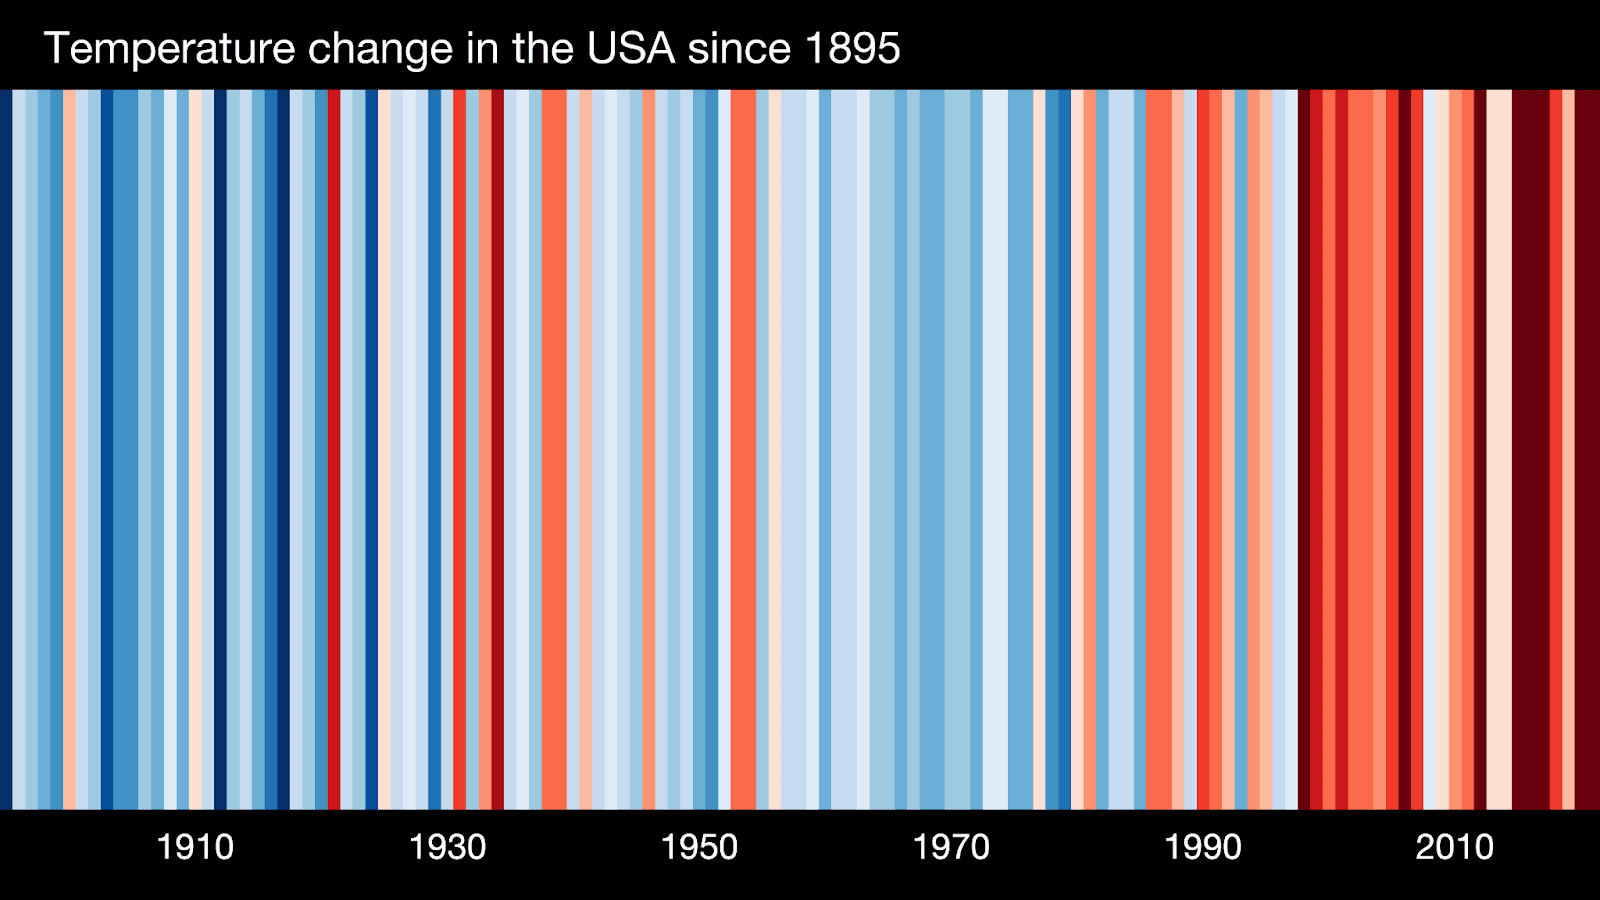 Graph: Increase in USA temperatures between 1895 to 2010, as depicted by colored bars phasing from blue to red